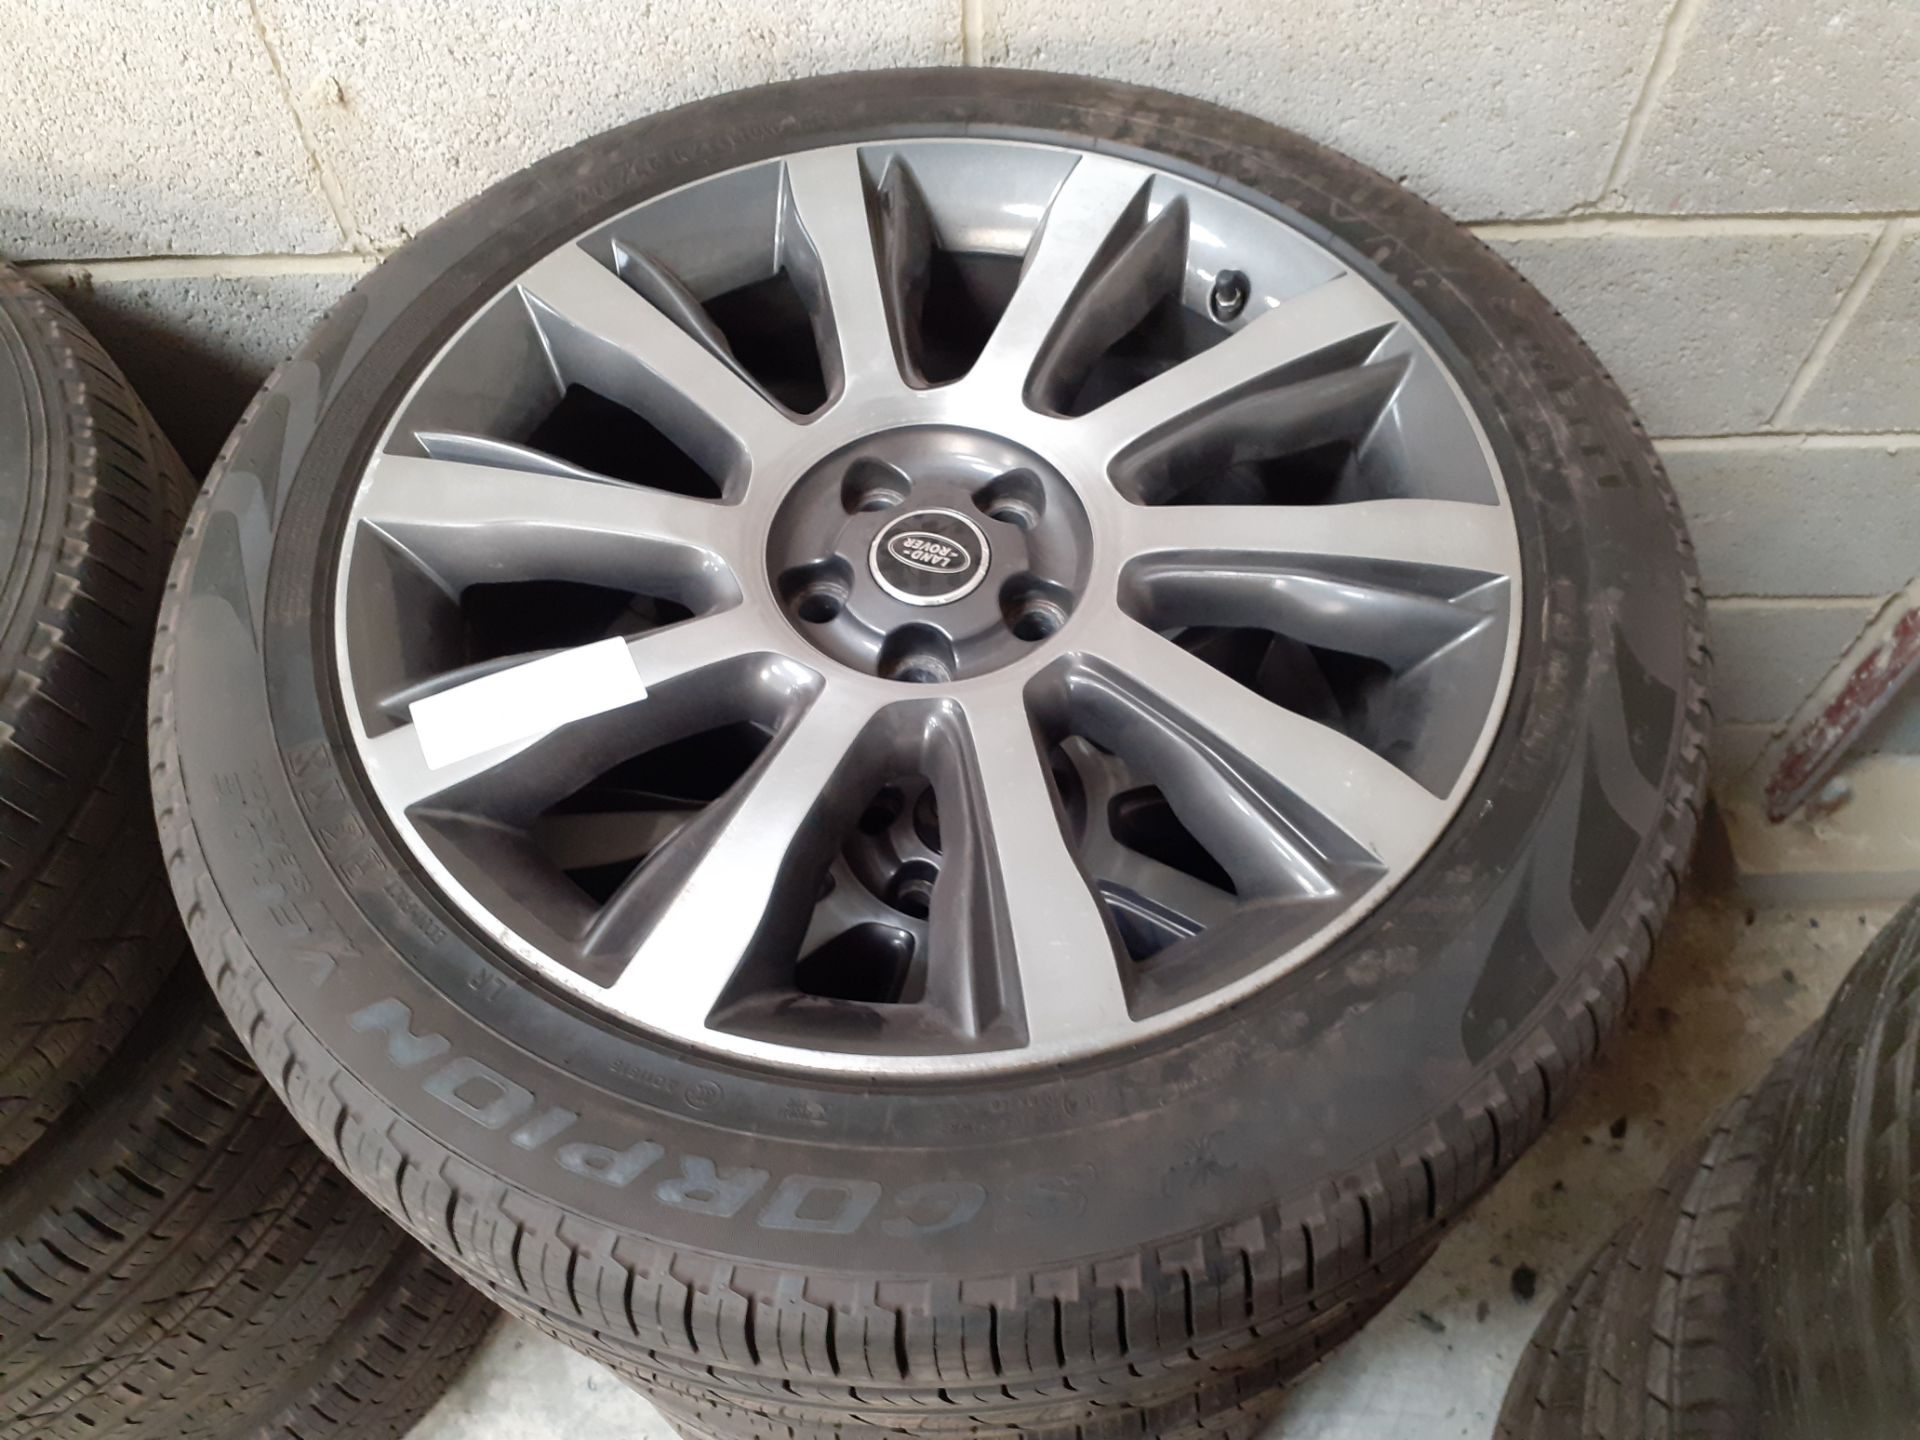 4 x LAND ROVER RANGE ROVER ALLOY WHEELS WITH TYRES 275 45 21, RRP £4200 *NO VAT*